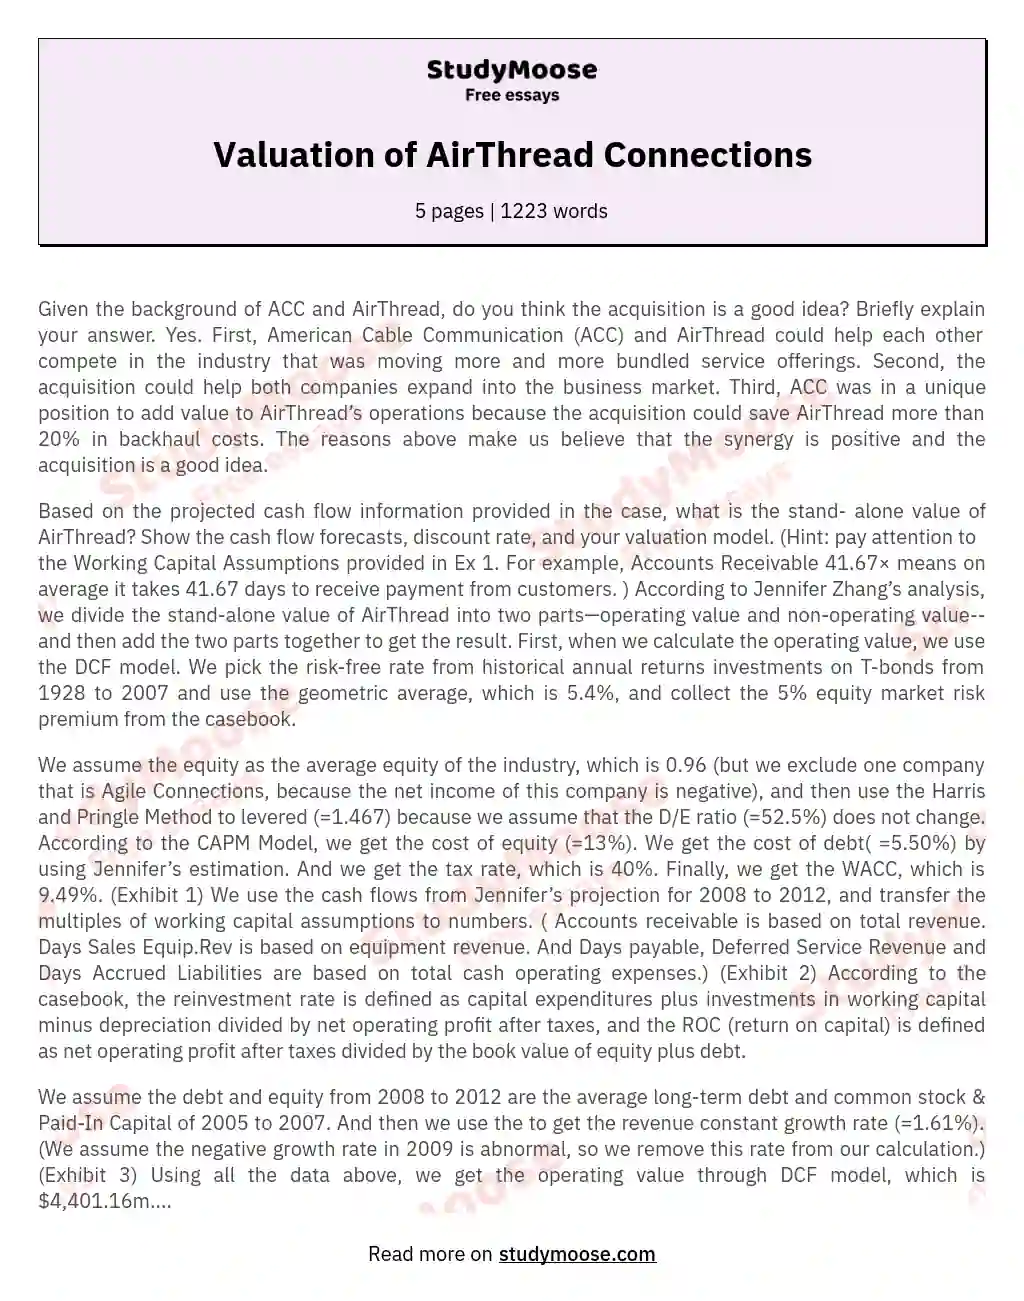 Valuation of AirThread Connections essay